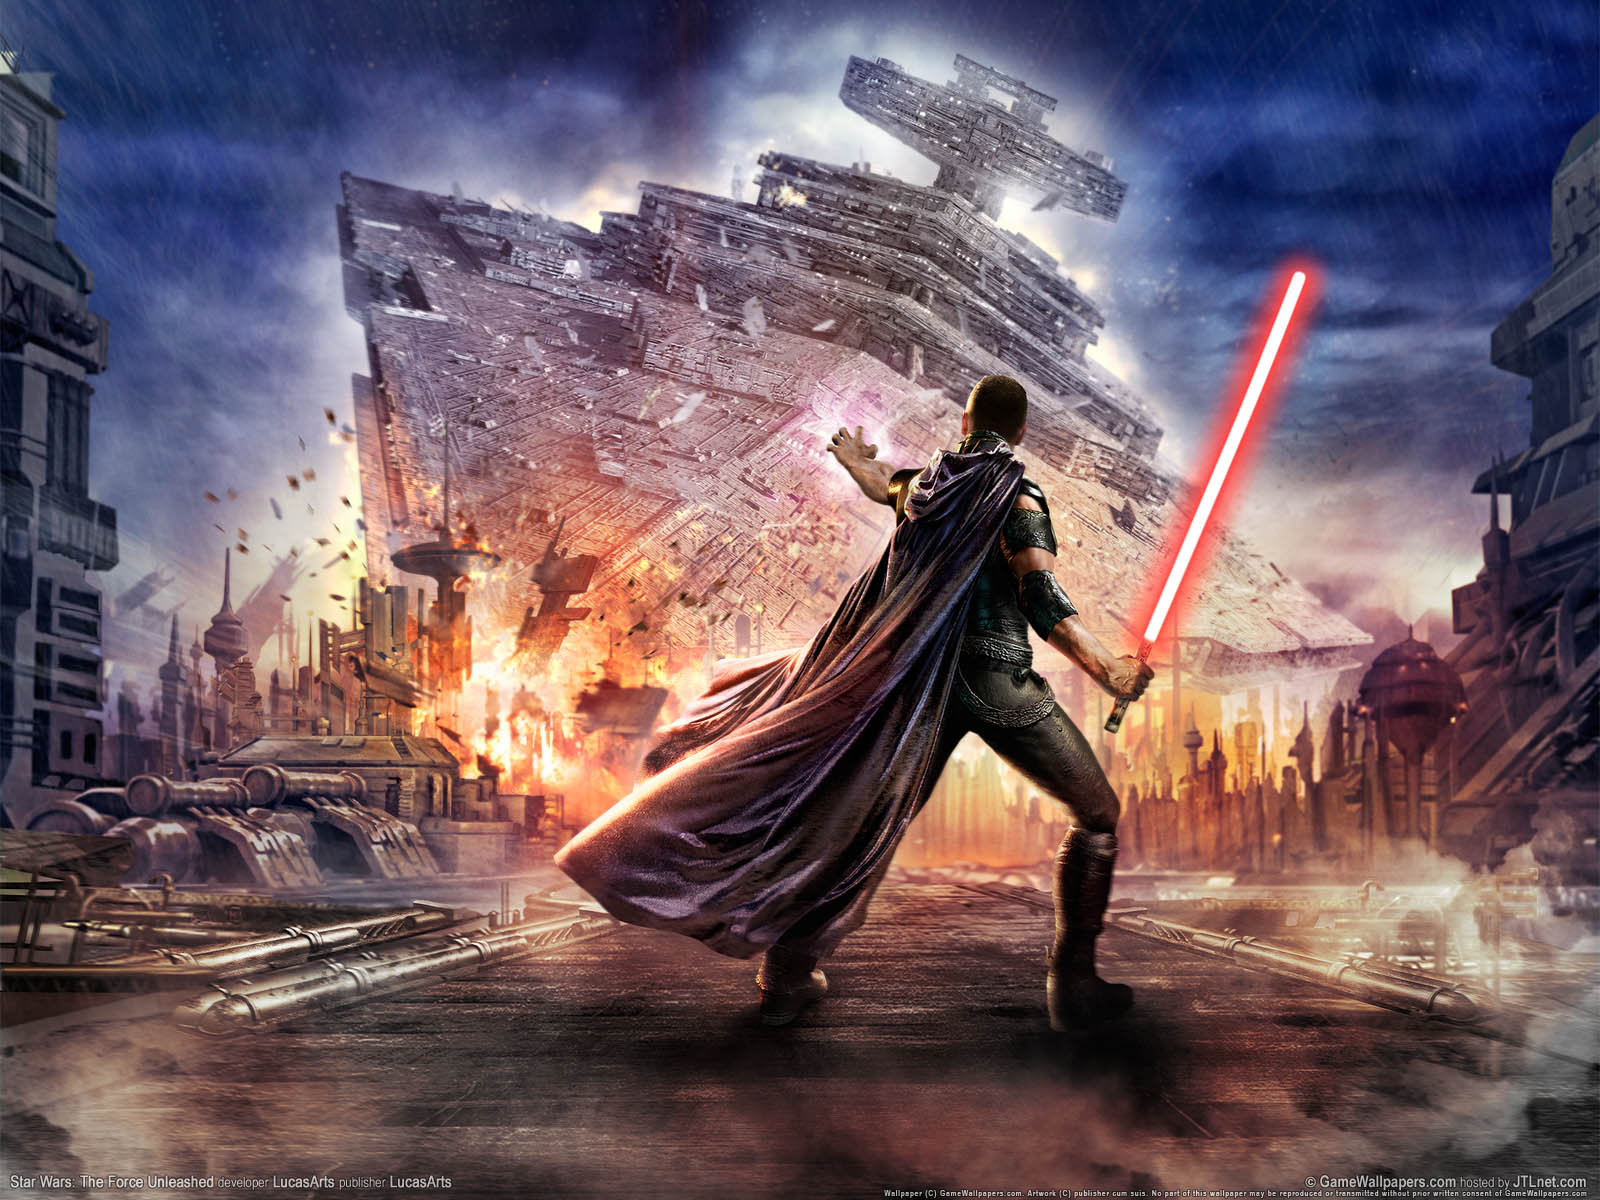 Star Wars%3A The Force Unleashed achtergrond 04 1600x1200